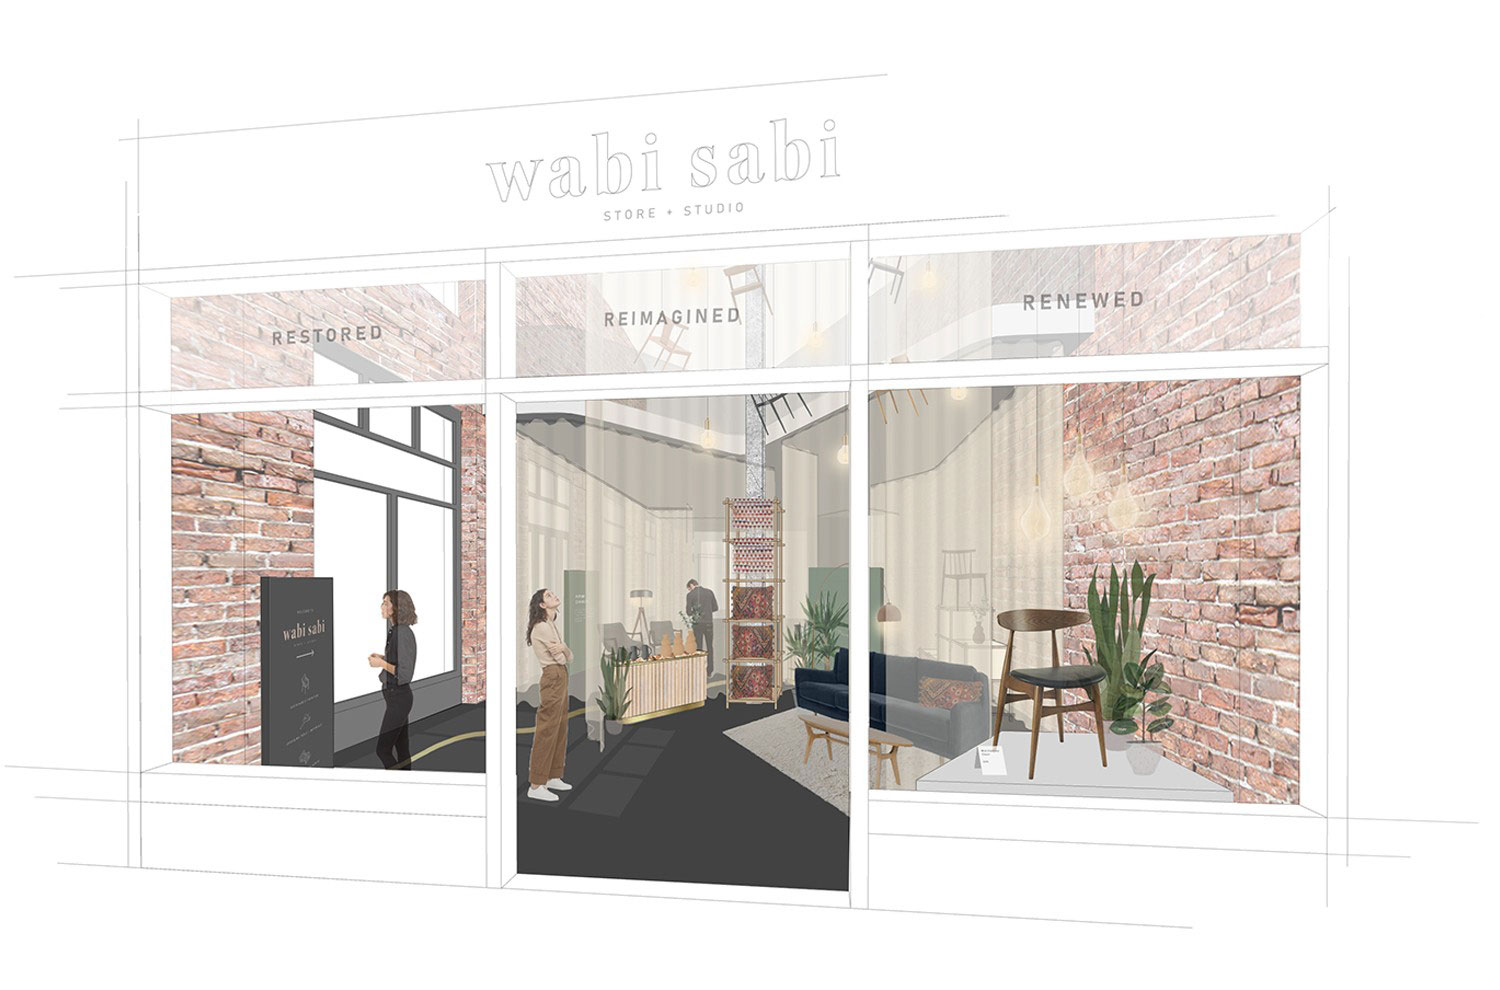 Wabi Sabi is a space for upcycling workshops and retail, highlighting the current backlash to a throw-away society